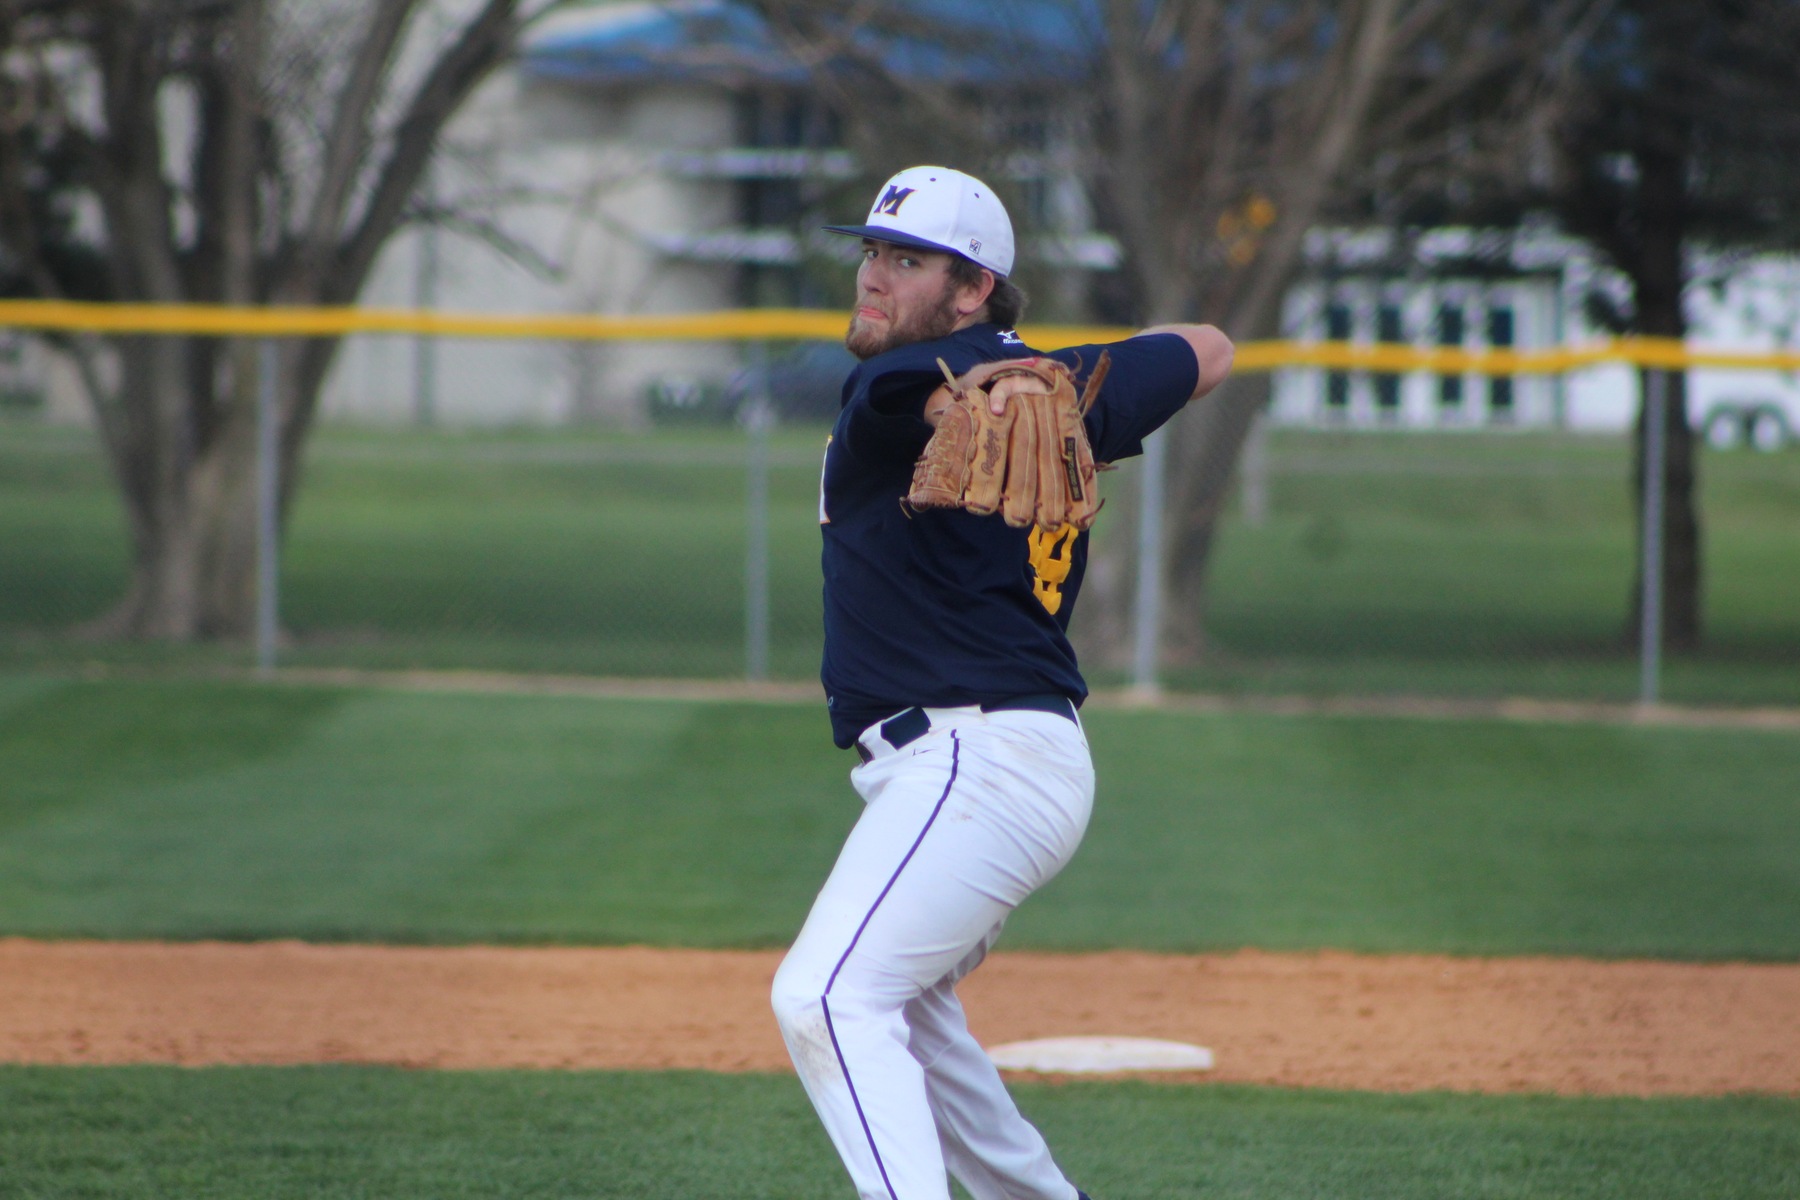 The MCC baseball team dropped two ICCAC games to No. 12 Iowa Western on Monday afternoon